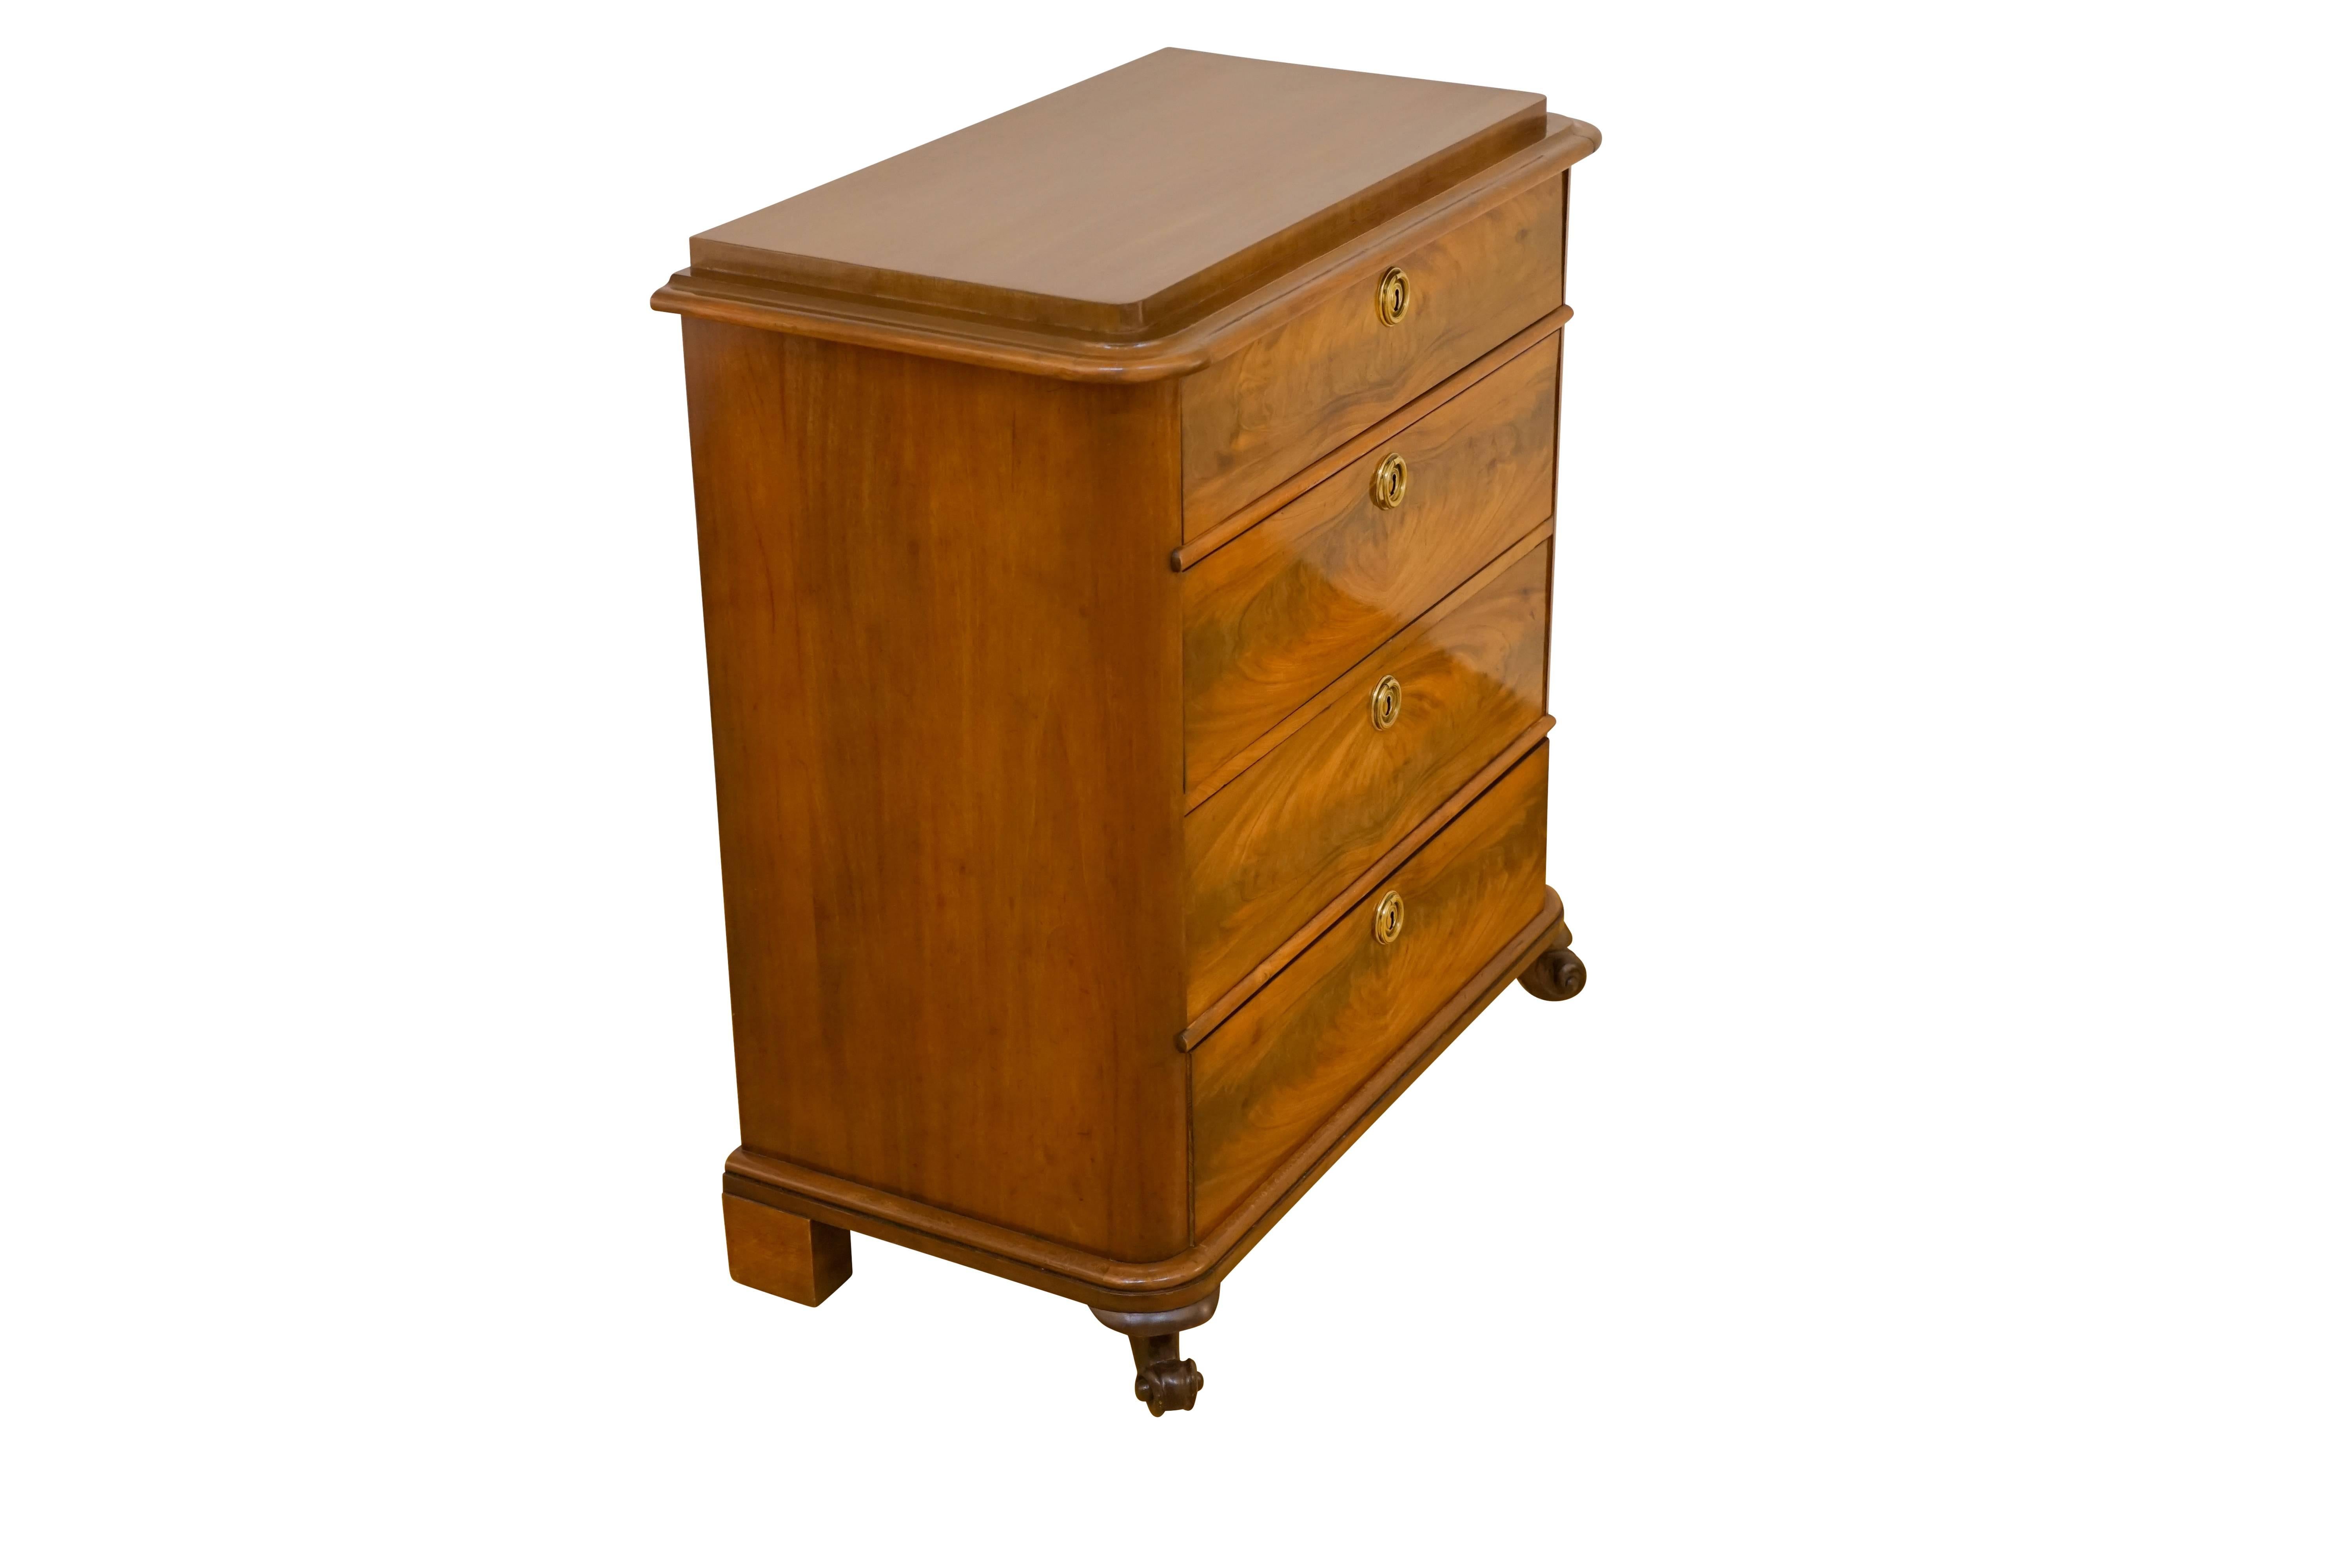 Classically designed, and crafted of solid mahogany, fir and flame mahogany veneers, the chest offers four locking drawers, with original escutcheons and key. Block feet about the wall, while curved and decorative feet face the world!